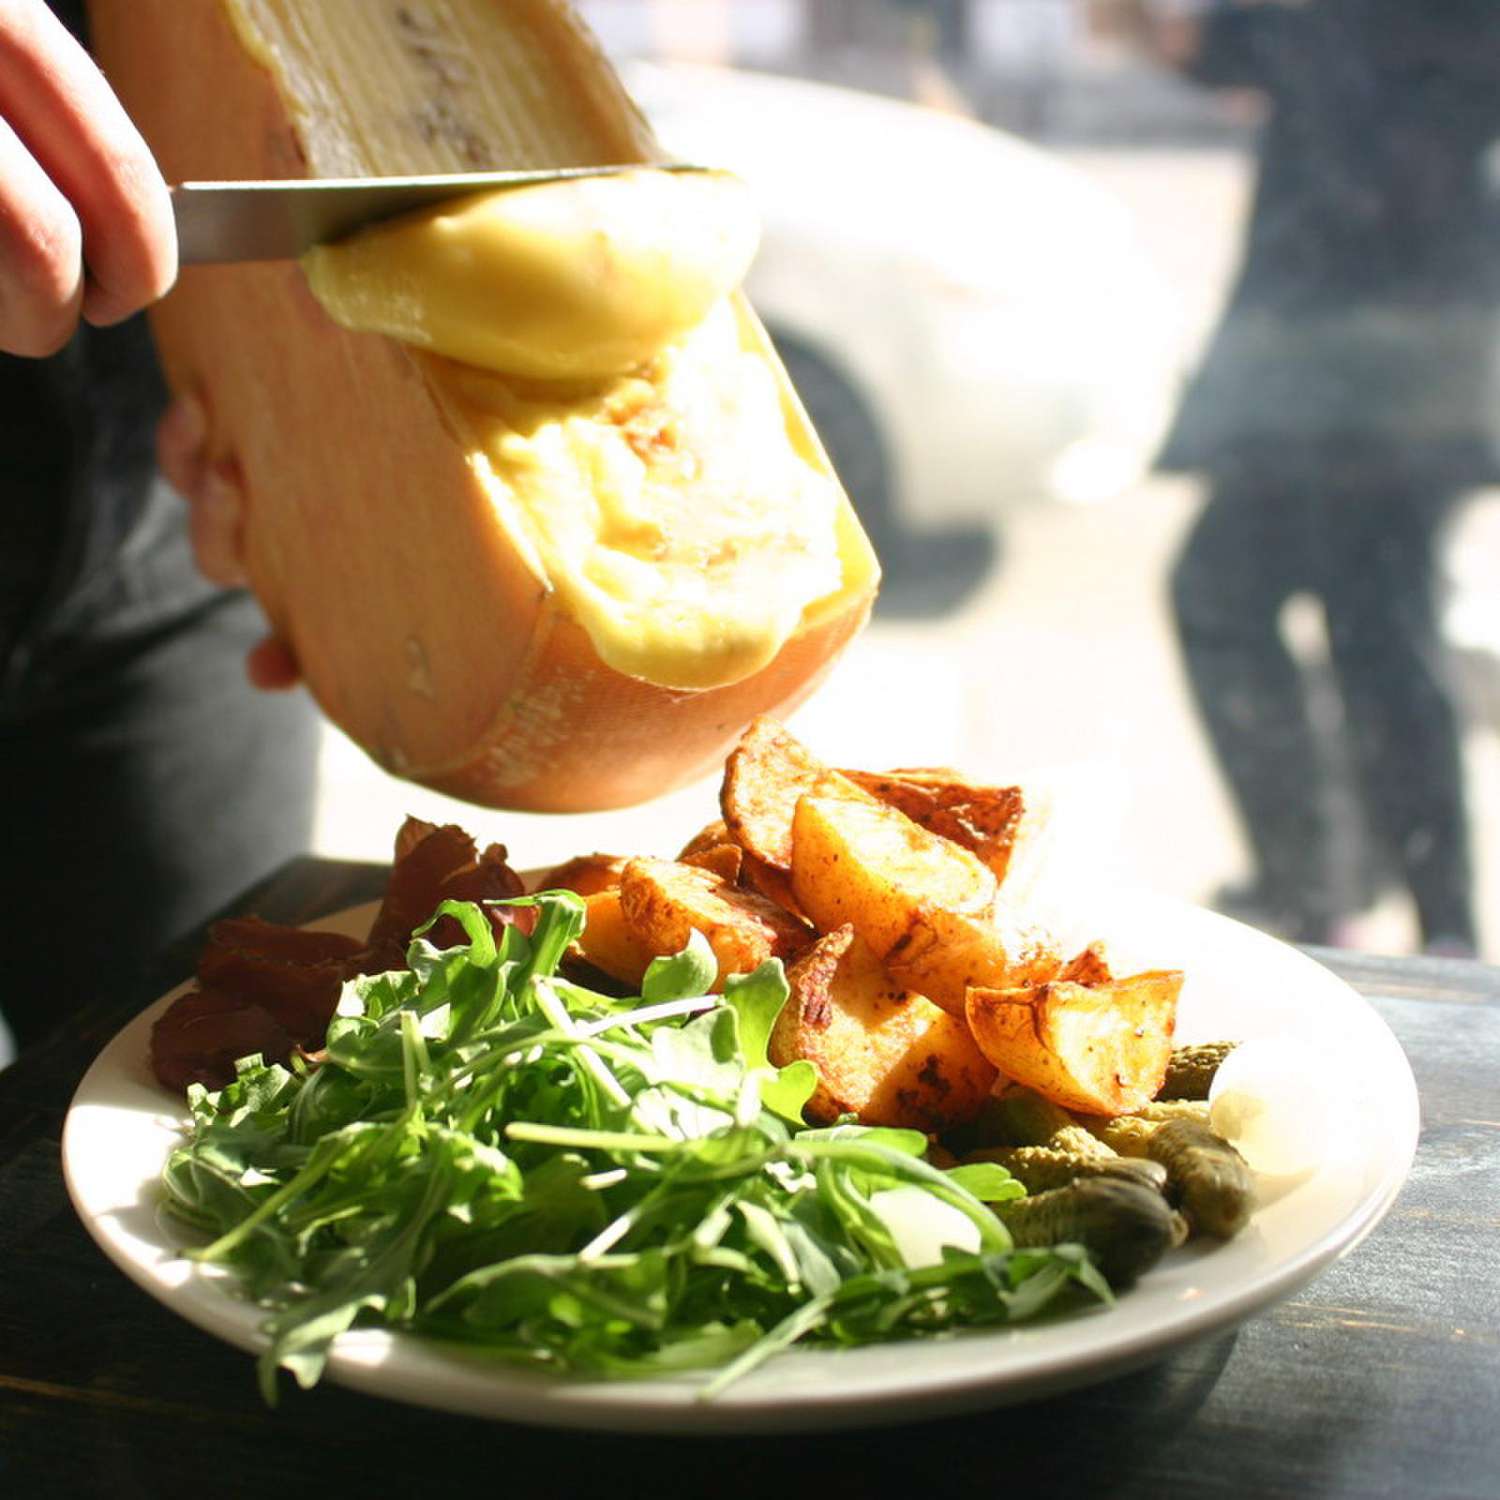 Raclette shaved onto greens